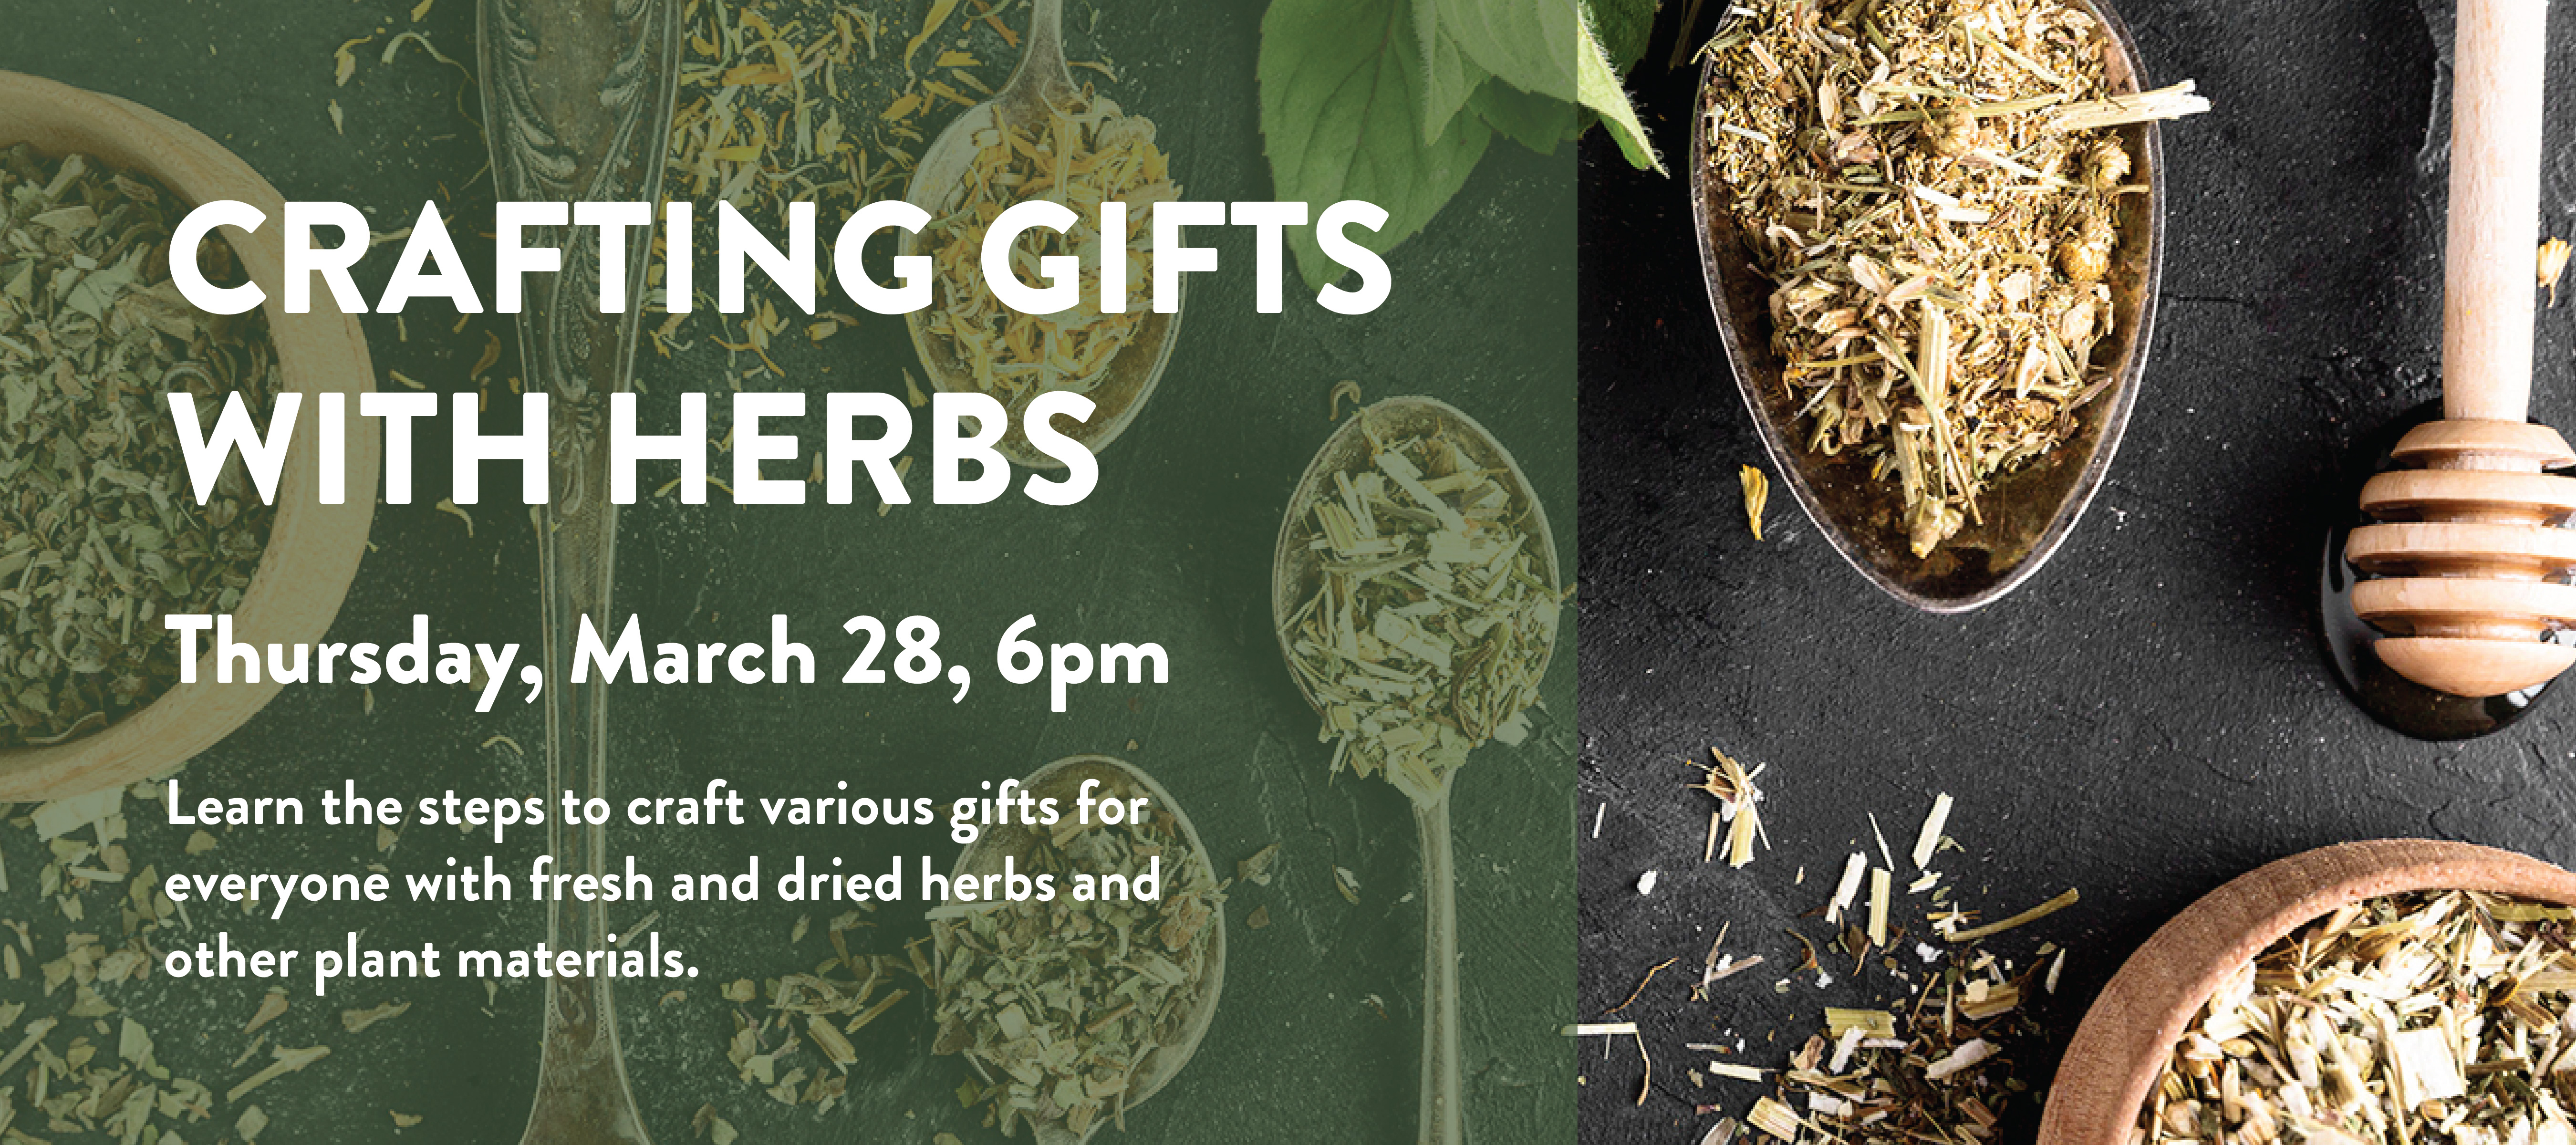 phpl, Prospect Heights Public Library, Crafting Gifts with Herbs, Adult